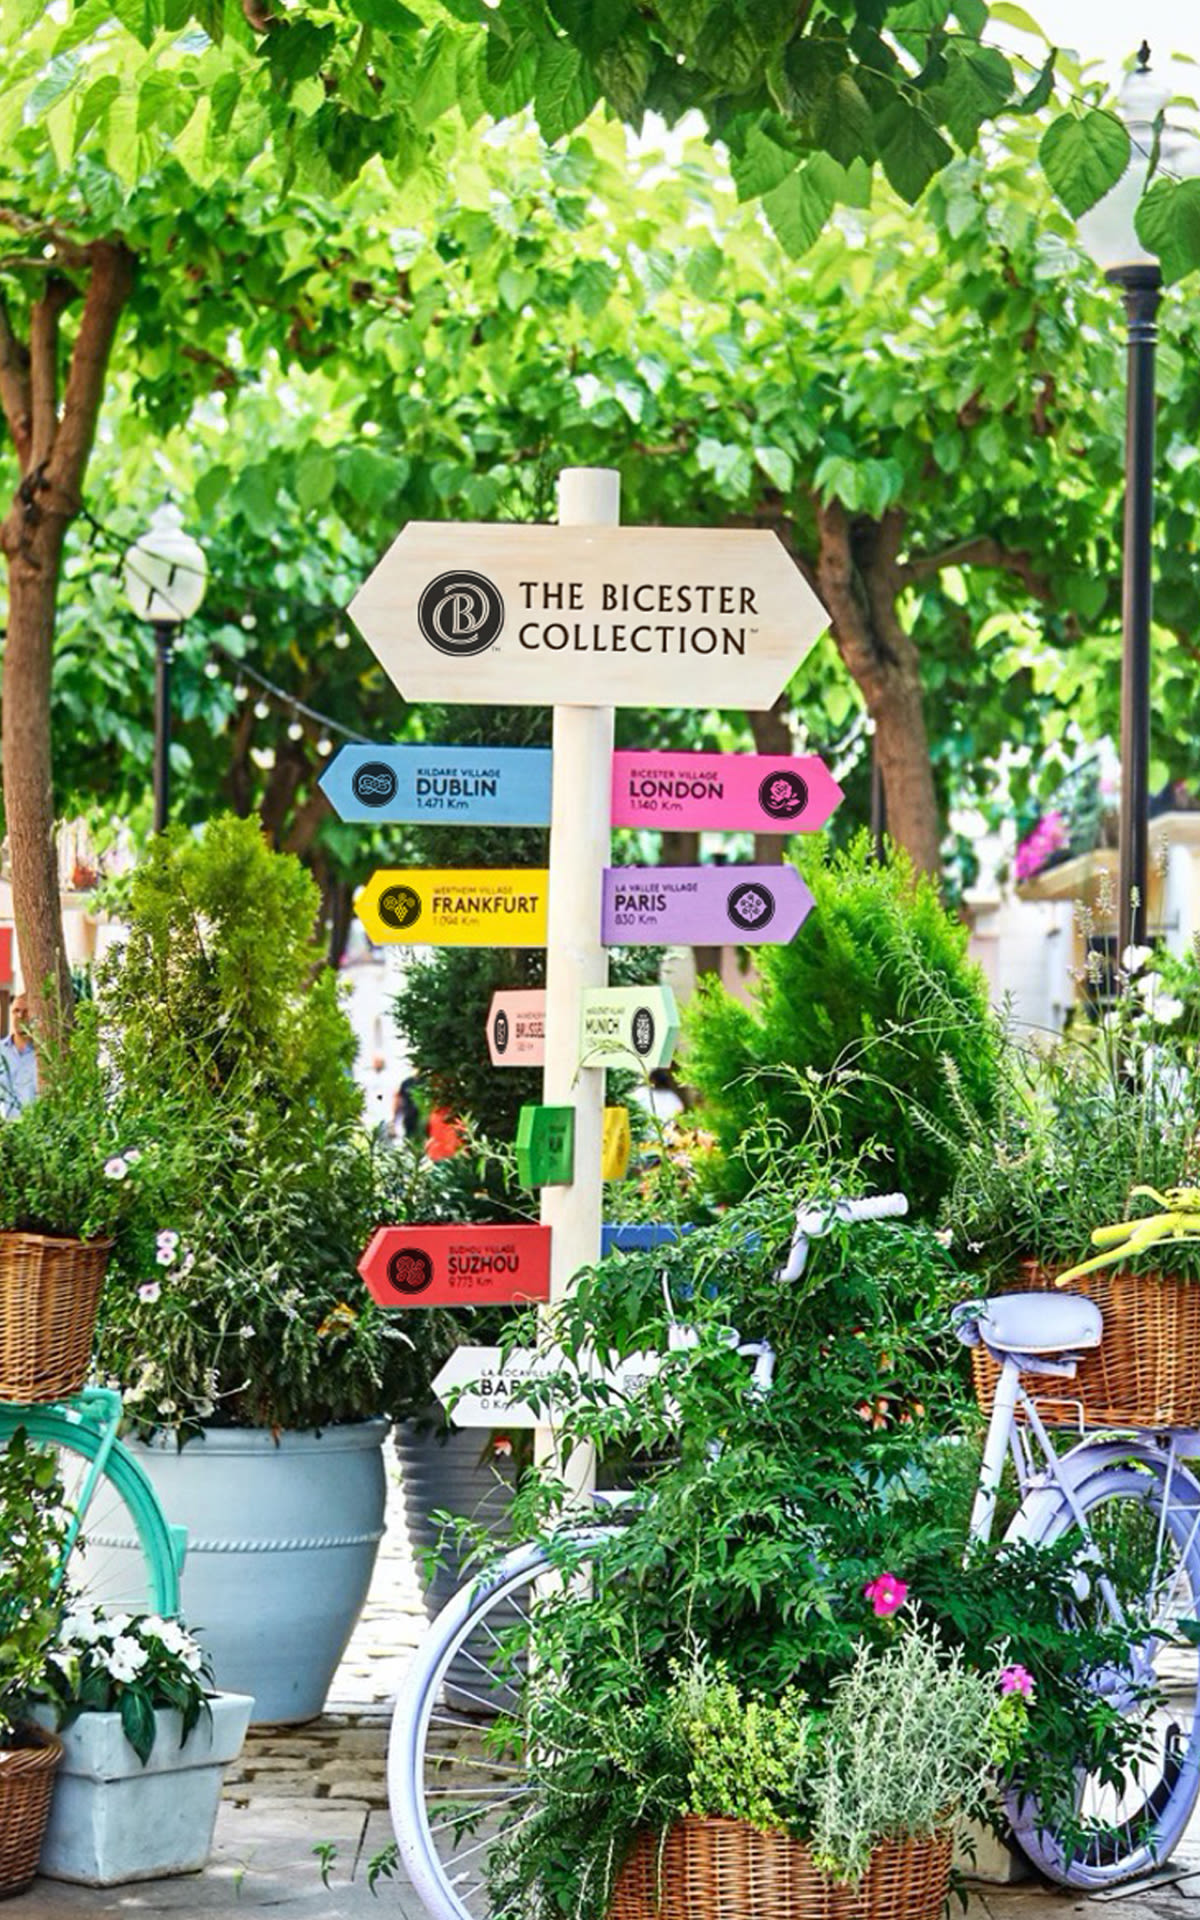 Plan your visit to one of the Villages at the Bicester Village Shopping Collection